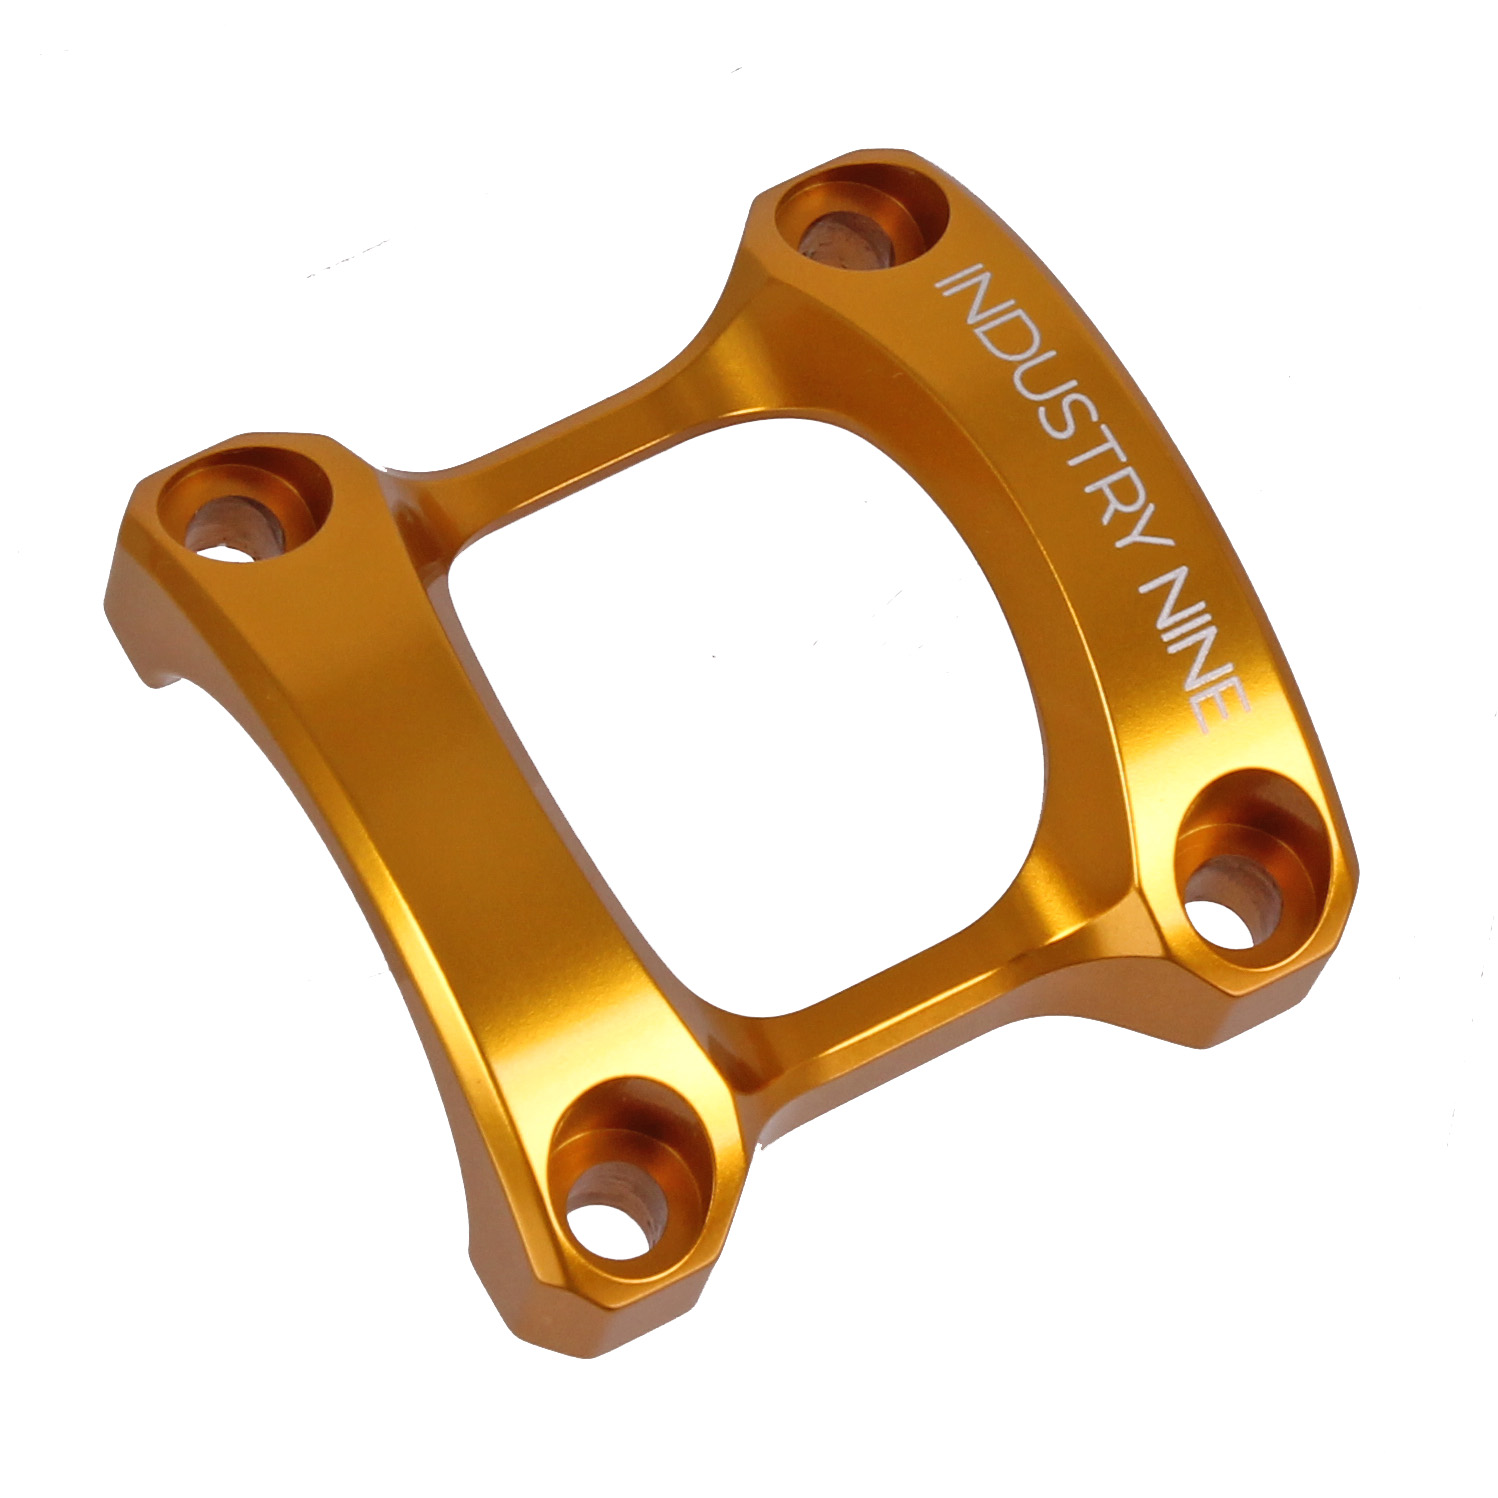 Industry Nine A35 Stem Faceplate, Gold